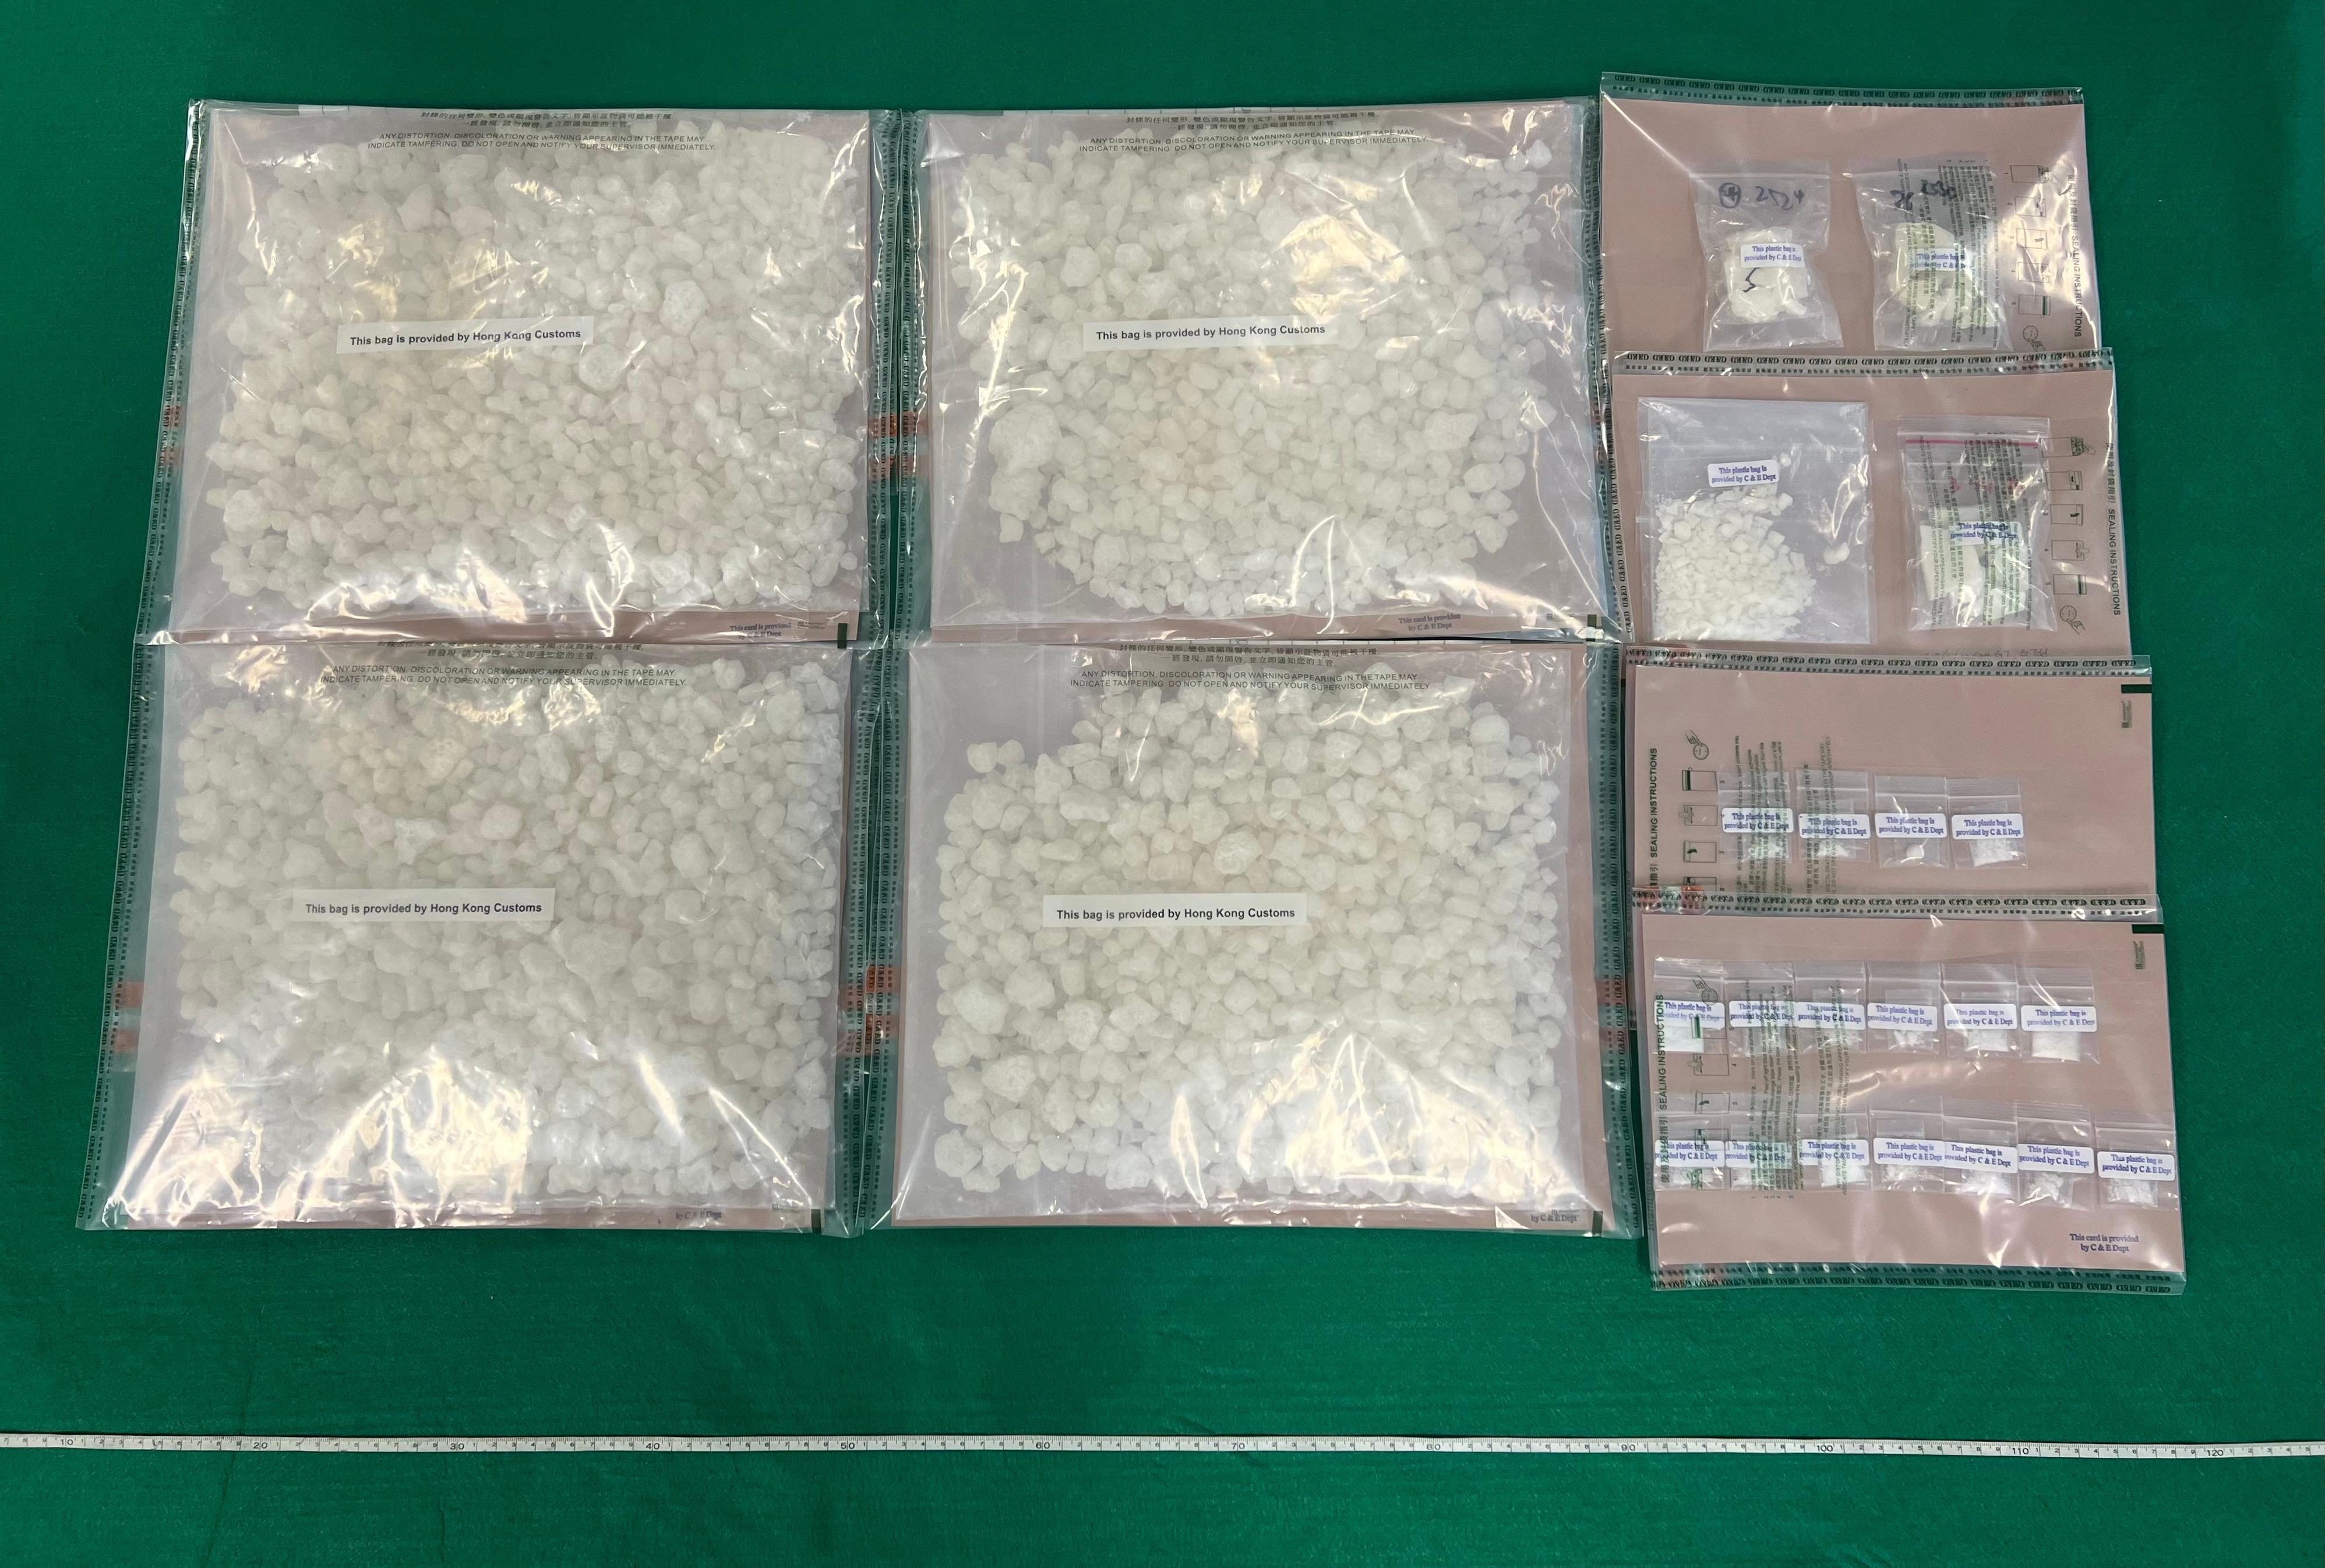 Hong Kong Customs on April 20 and yesterday (April 24) seized a total of about 5.6 kilograms of suspected ketamine and about 120 grams of suspected crack cocaine with a total estimated market value of about $2.6 million in the New Territories. Two men were arrested. Photo shows the suspected dangerous drugs seized.